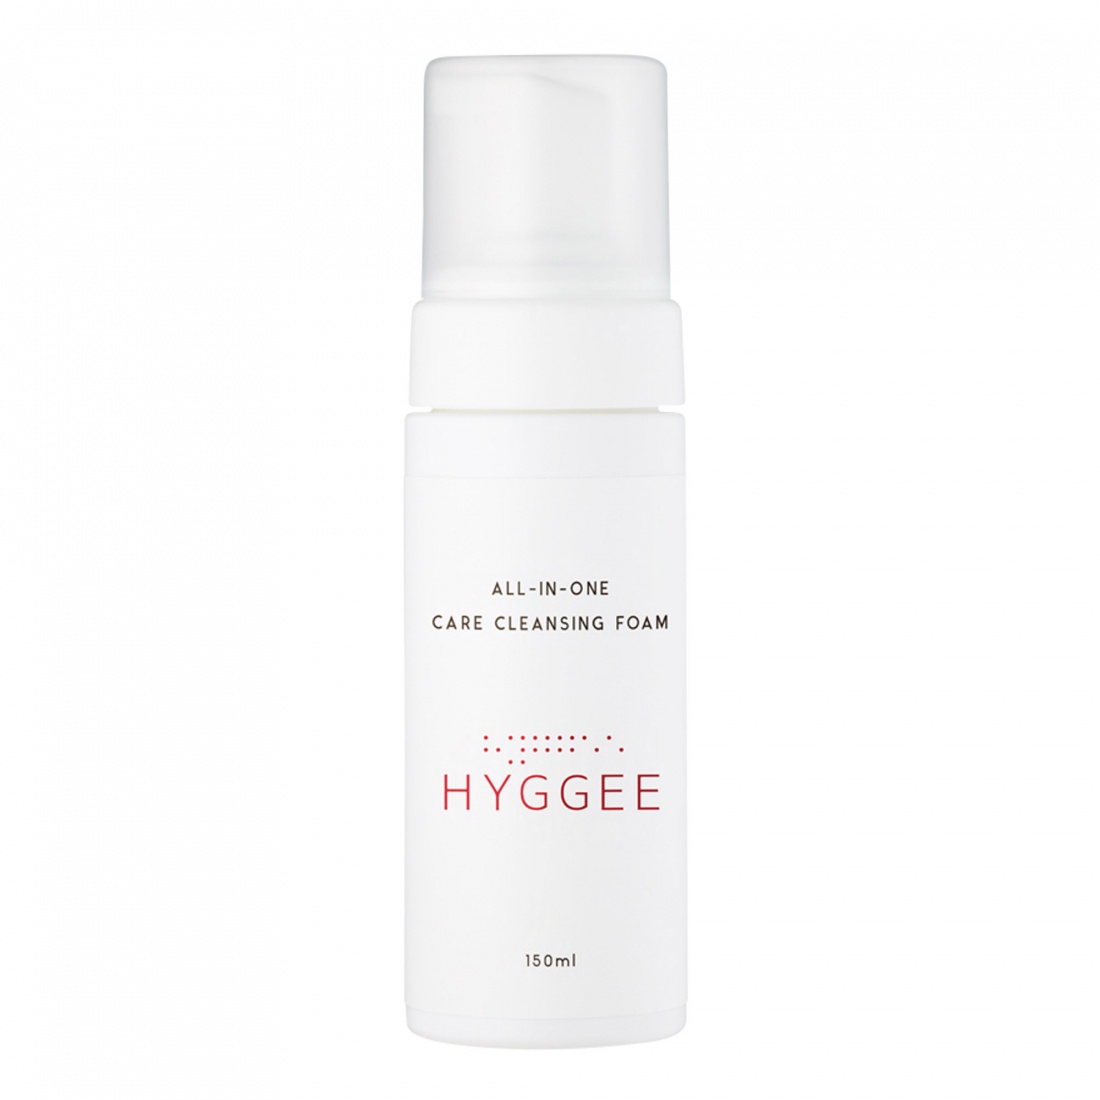 hyggee All-In-One Care Cleansing Foam